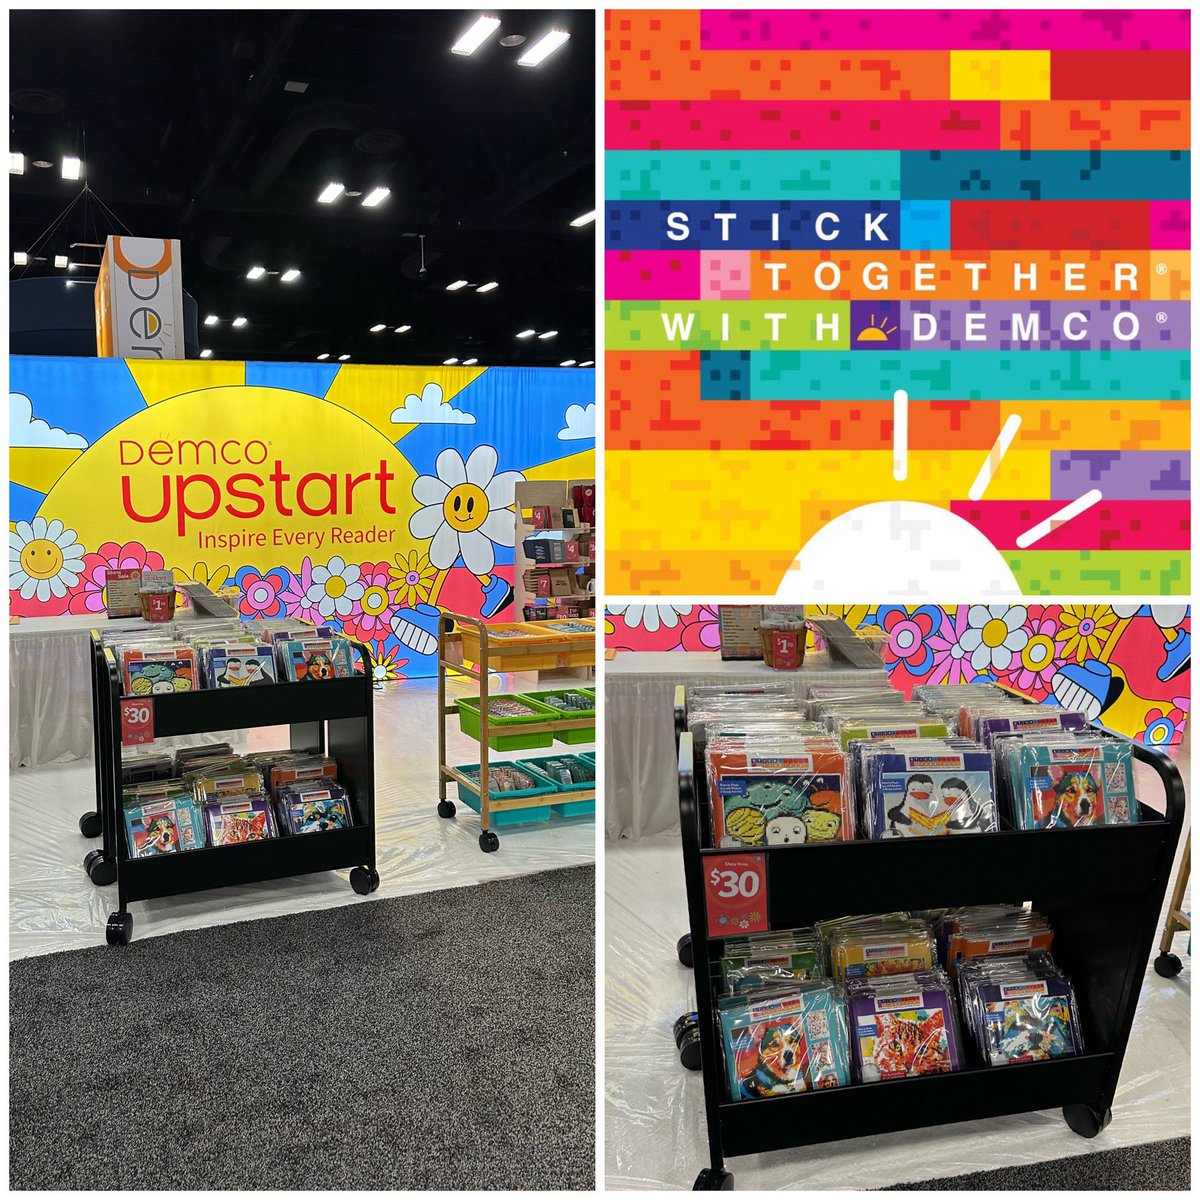 It was so exciting to celebrate the amazing news of @byStickTogether joining the @demco family this week. 

And I loved finding lots of special StickTogether sticker posters in the Demco booth at #TXLA24 ❤️

#letsticktogether #futurereadylibs #tlchat #stem #steam #istelib